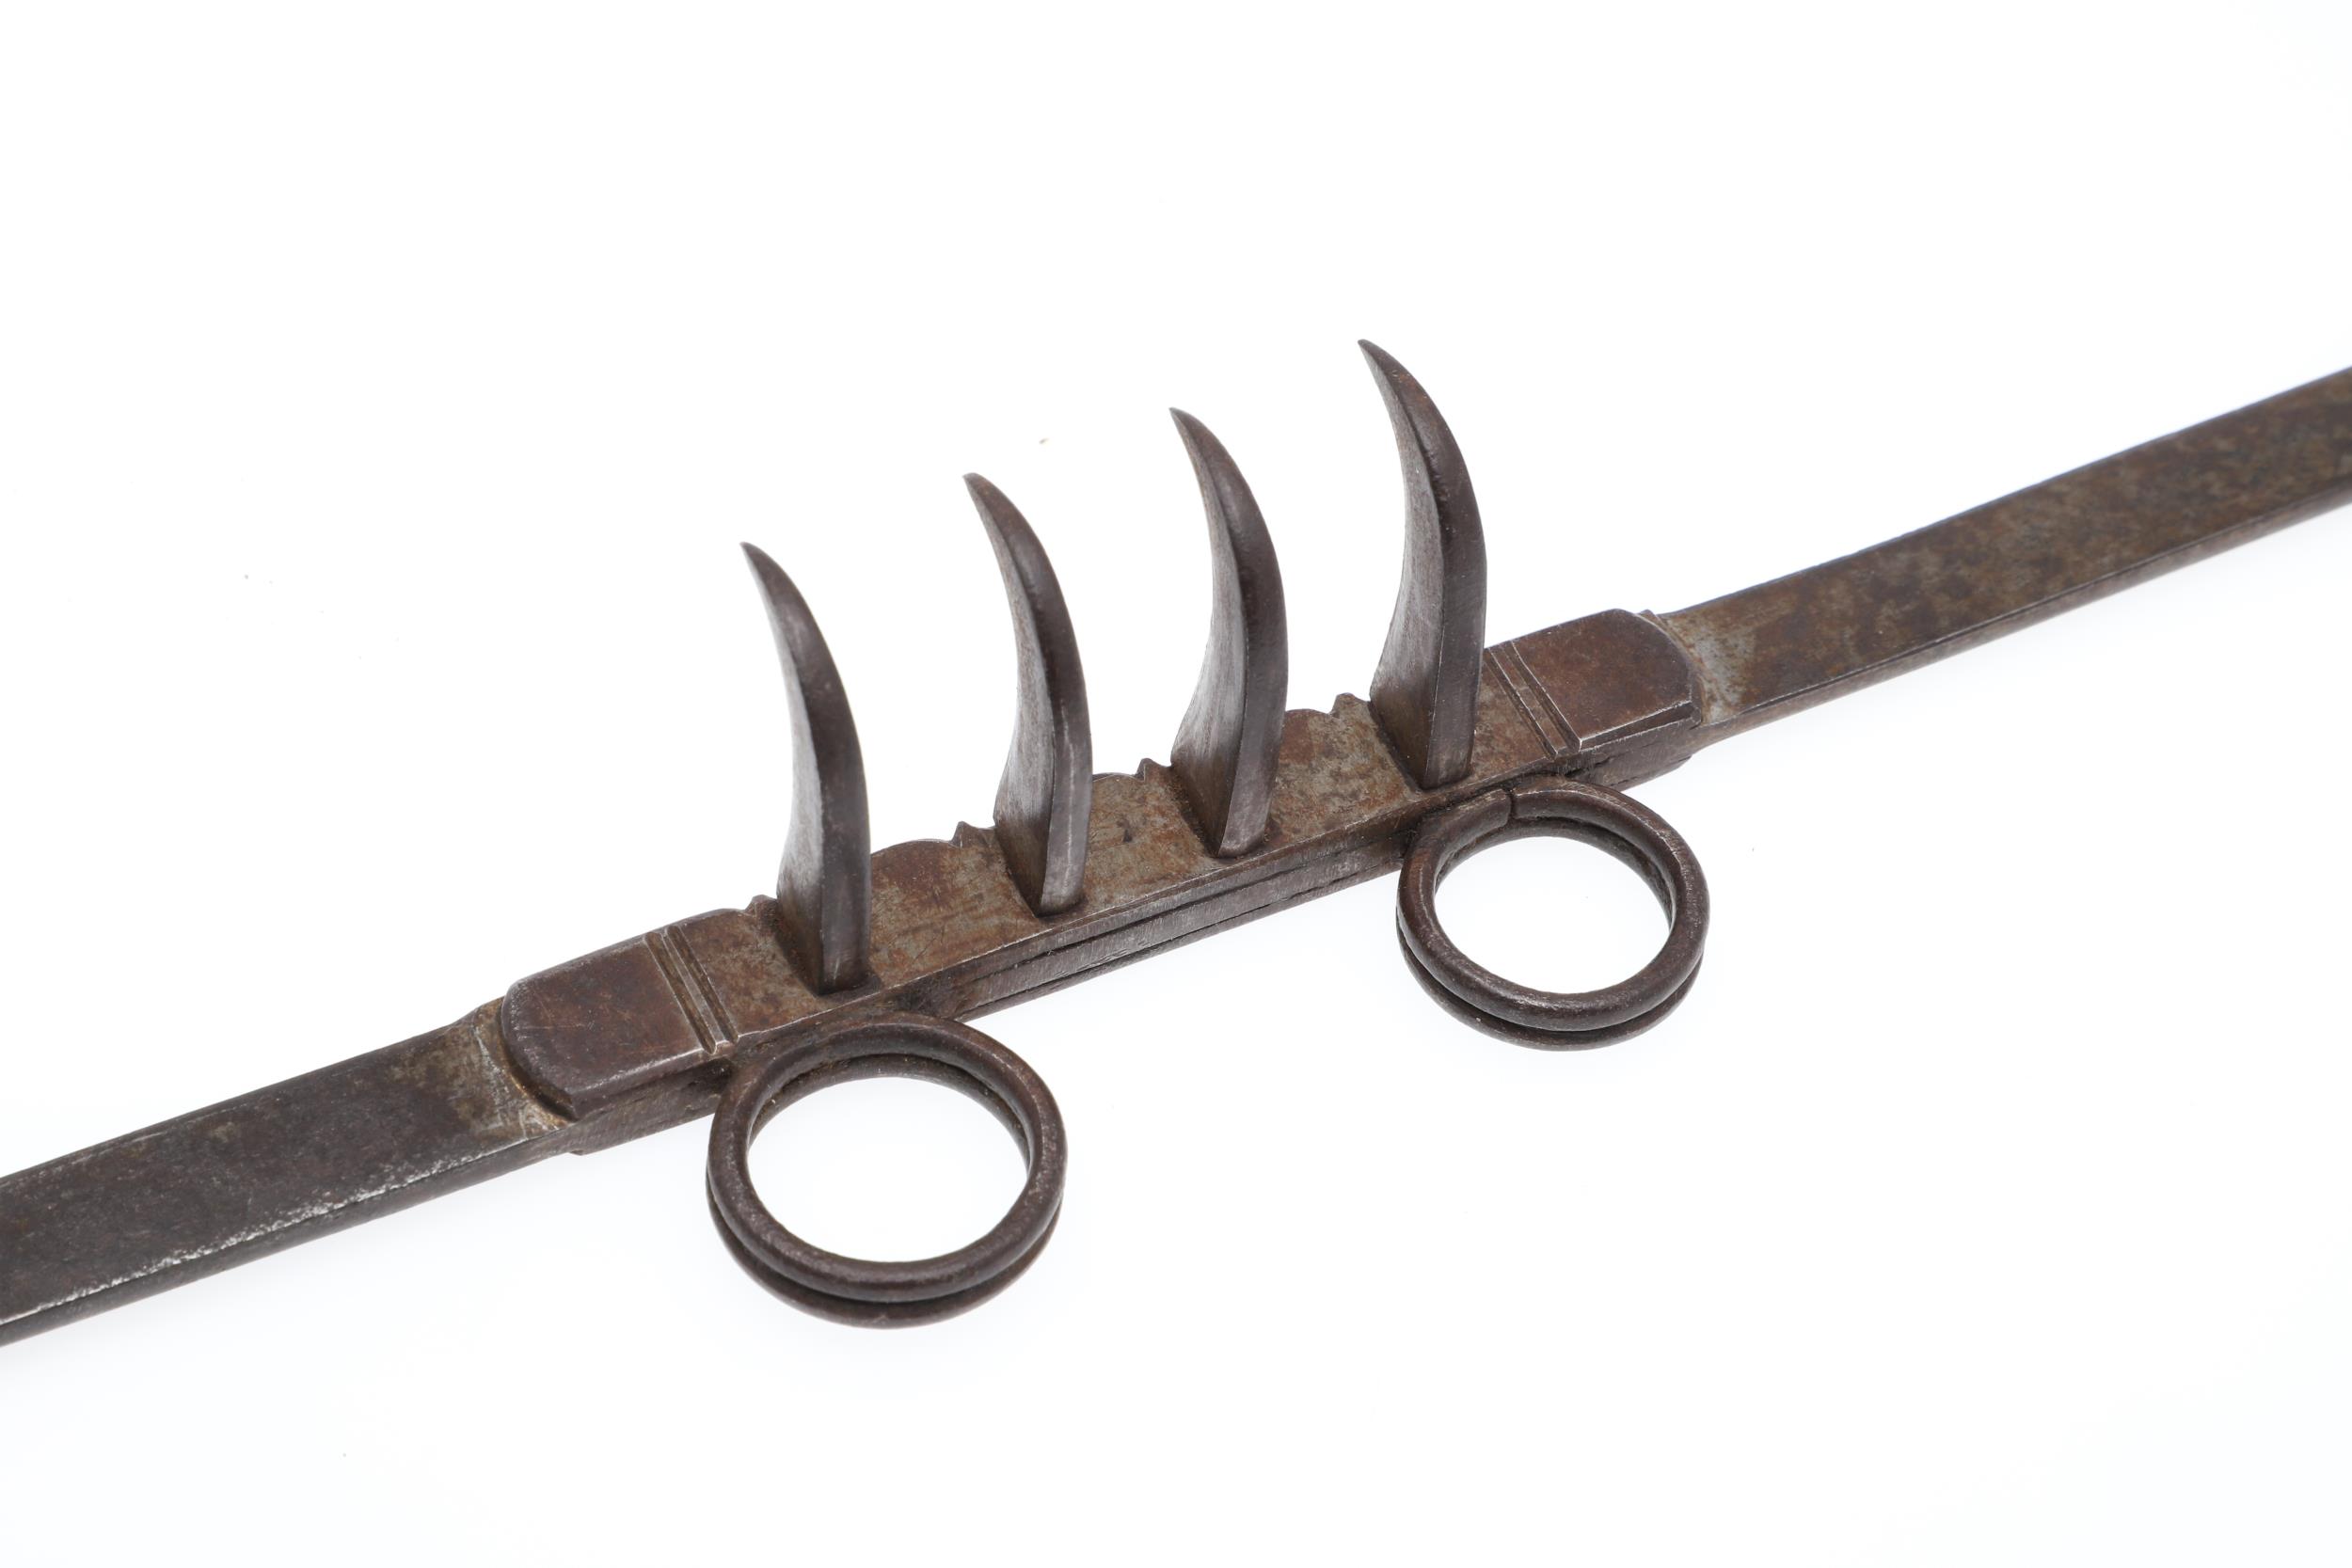 AN INDIAN BAGH NAKH OR TIGER'S CLAW KNIFE. - Image 3 of 6